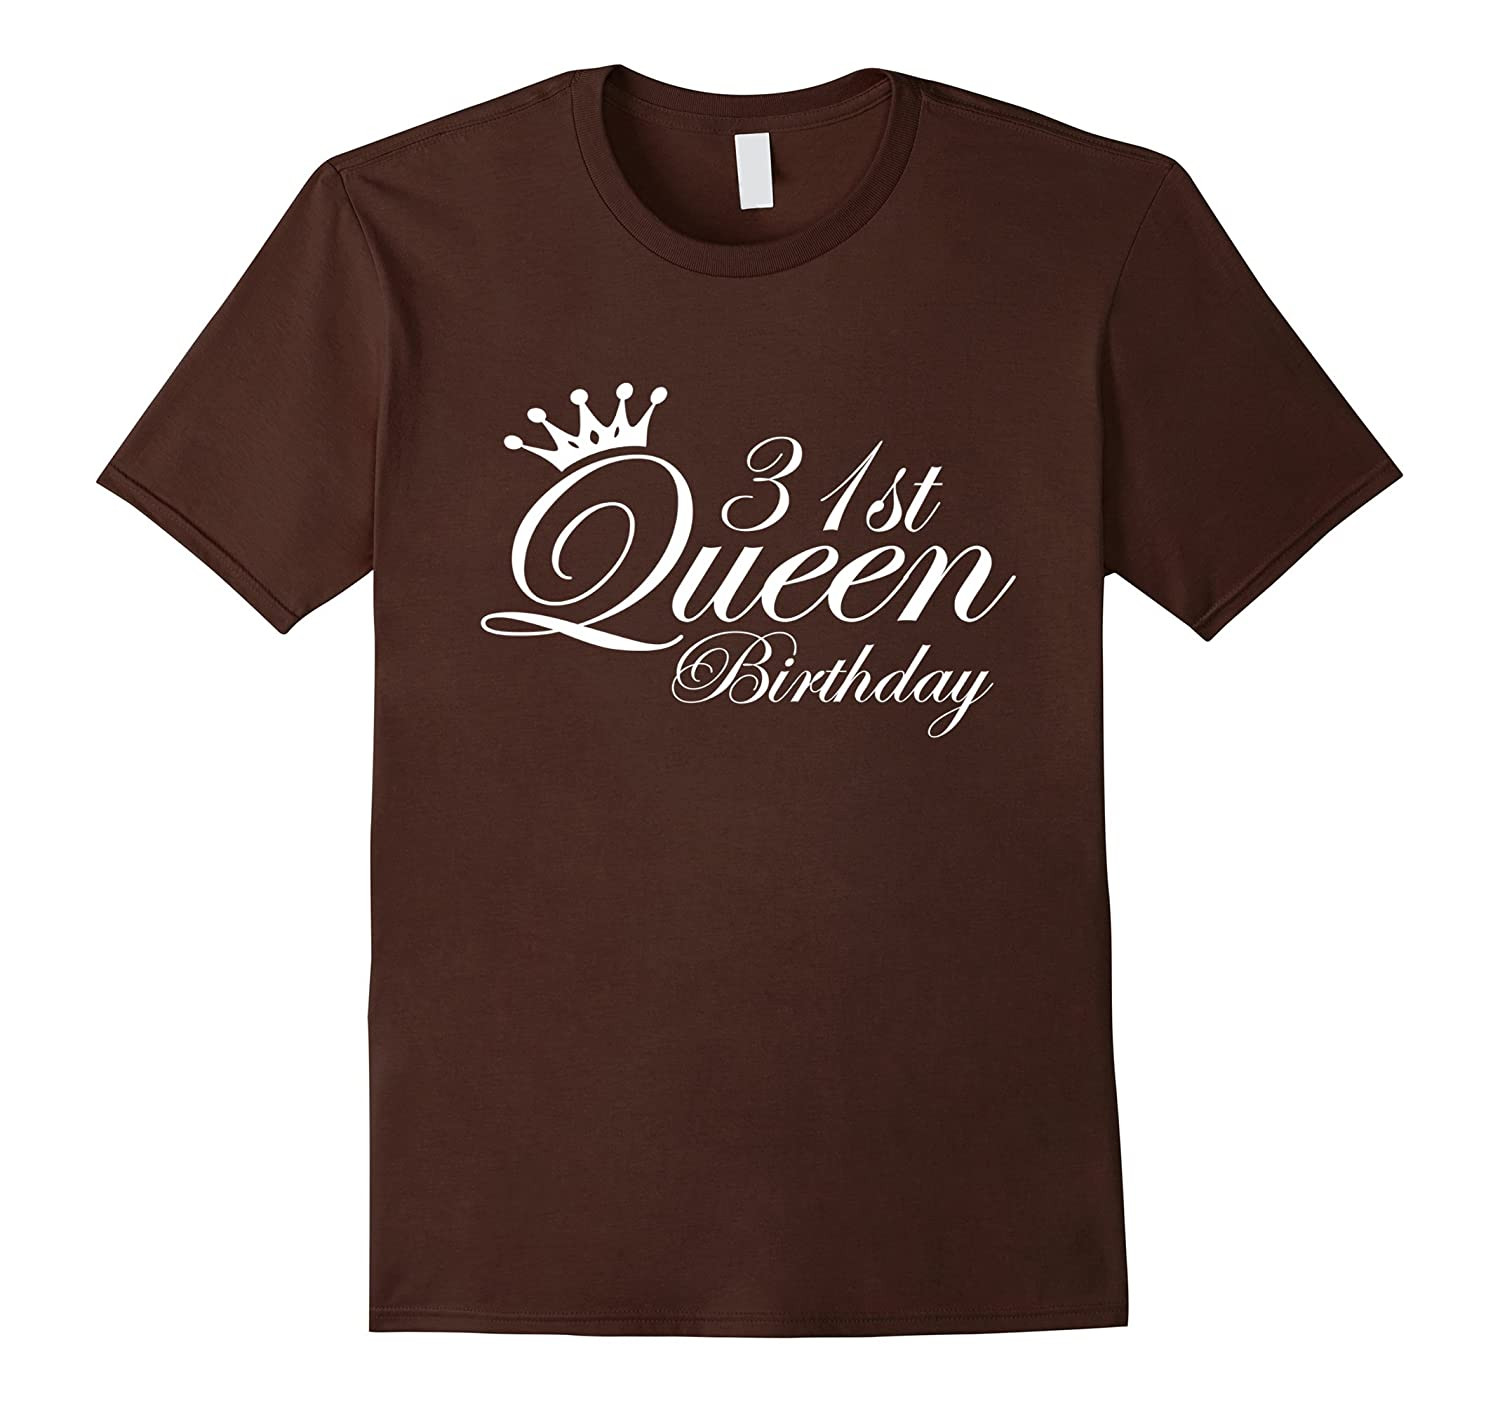 31St Birthday Gift Ideas For Her
 31st Queen 31 Year Old 31st Birthday Gift Ideas for Her